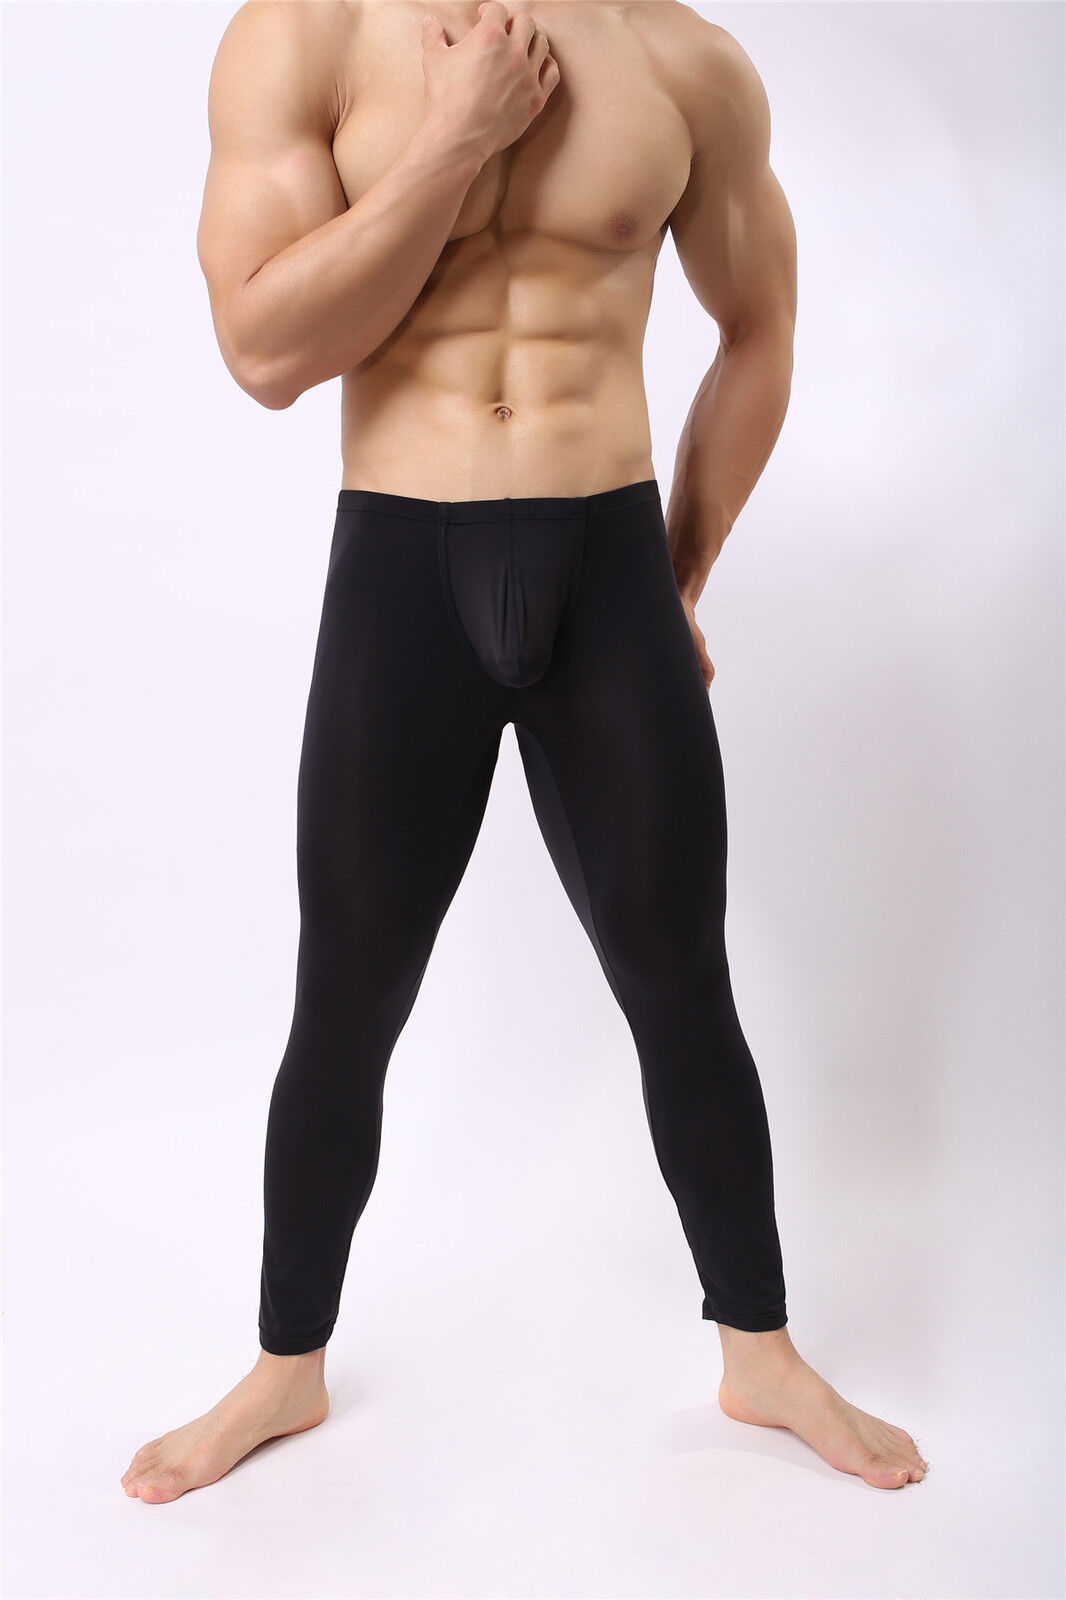 Mens Smooth Long Johns Bulge Pouch Tight Fit Pants Slip Underpants Underwear Hot